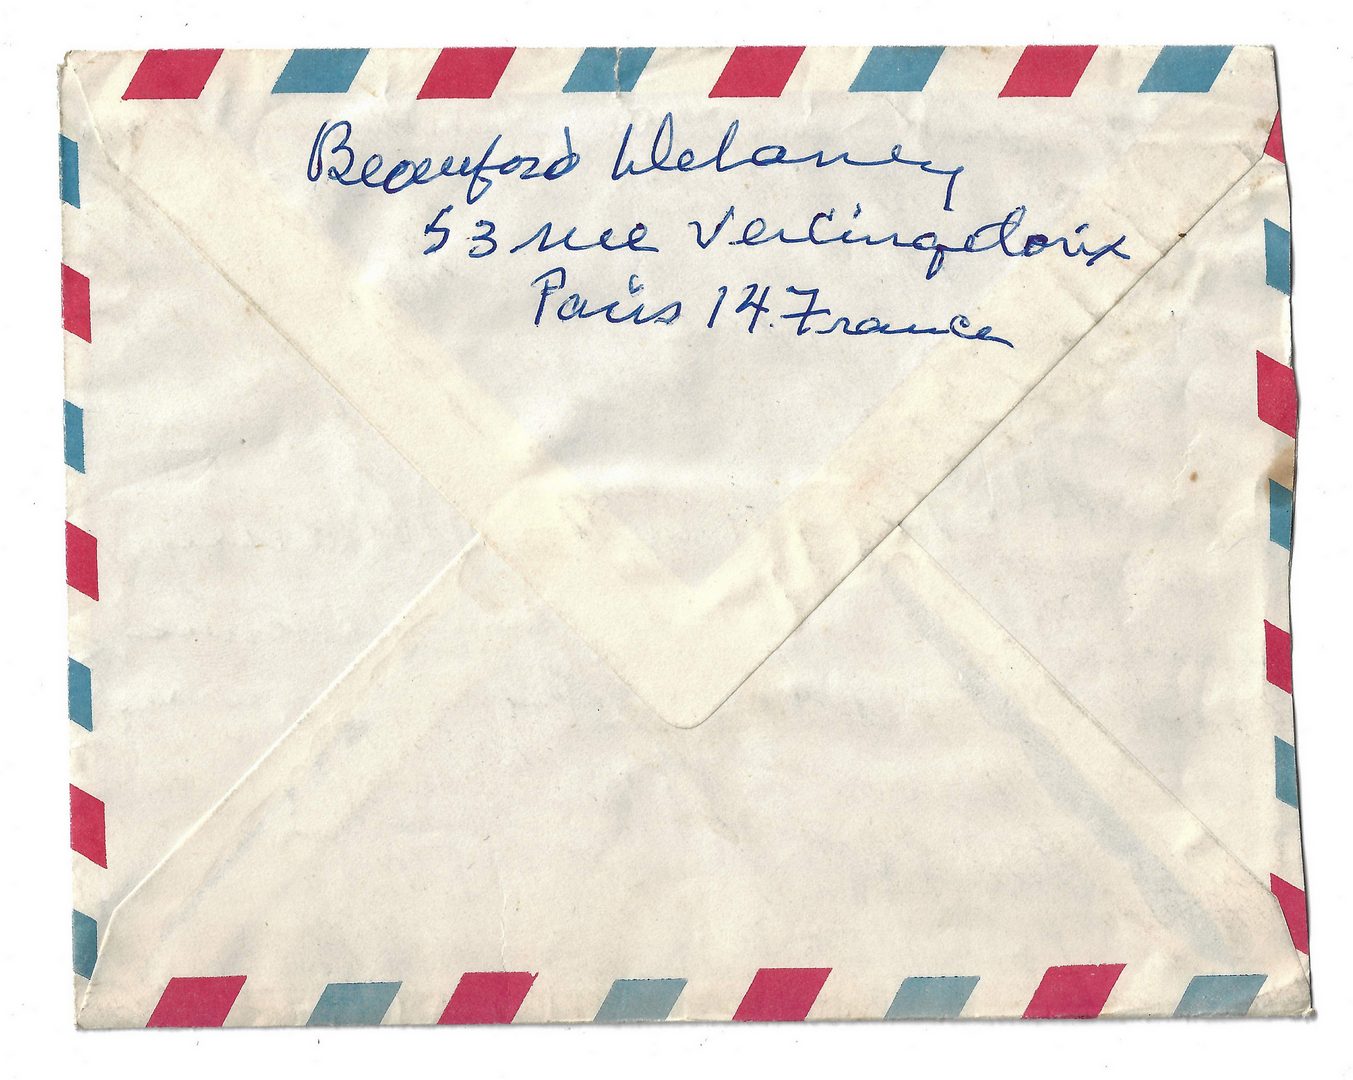 Lot 487: Archive of Beauford Delaney Letters and Related Objects